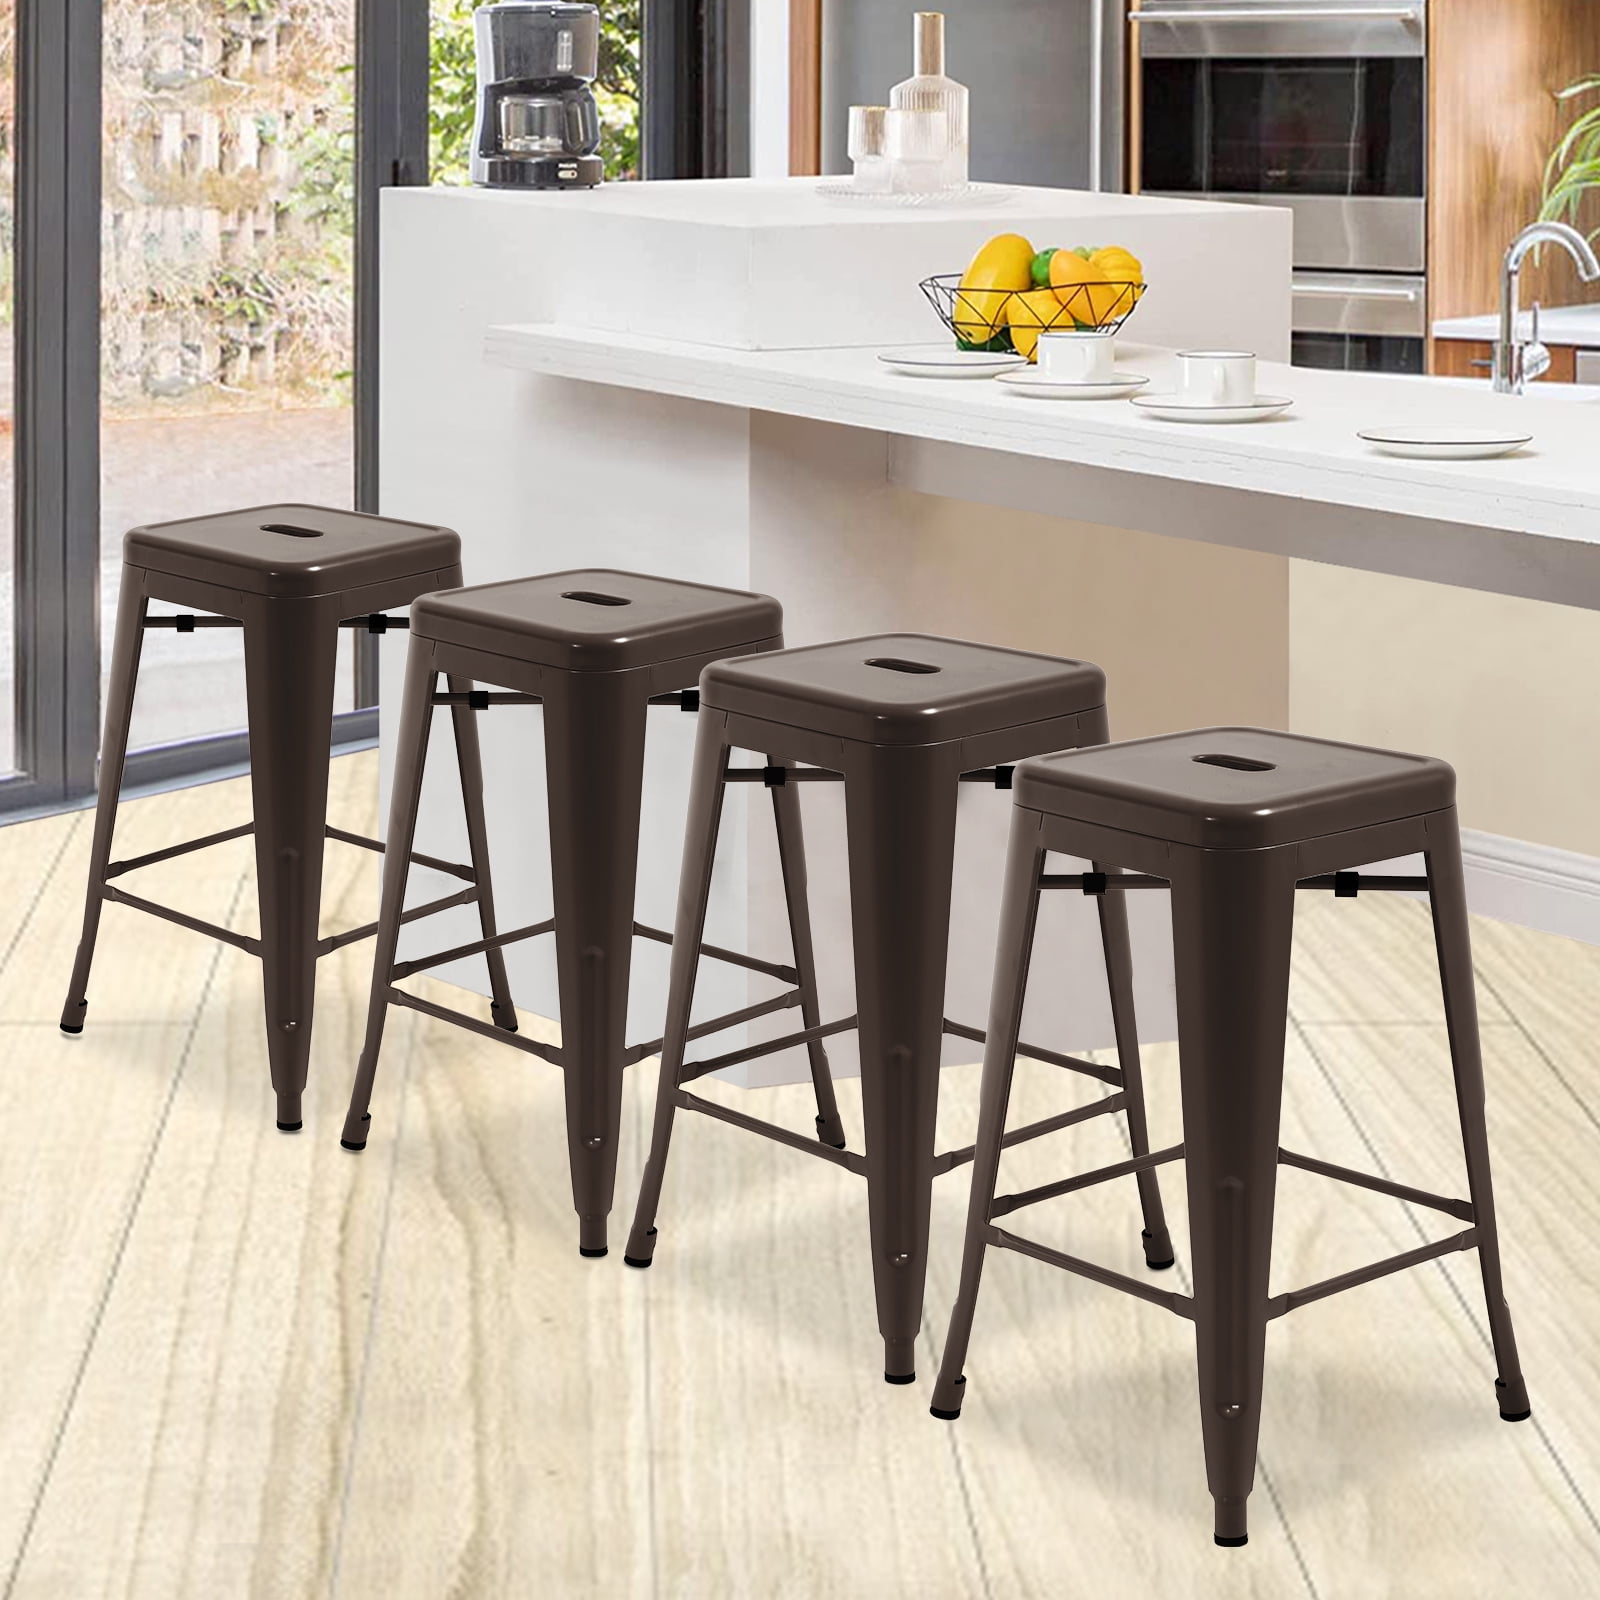  Alunaune 24 Metal Bar Stools Set of 4 Industrial Backless  Counter Height Barstools Kitchen Patio Stool Stackable with Wooden Seat-  White : Home & Kitchen